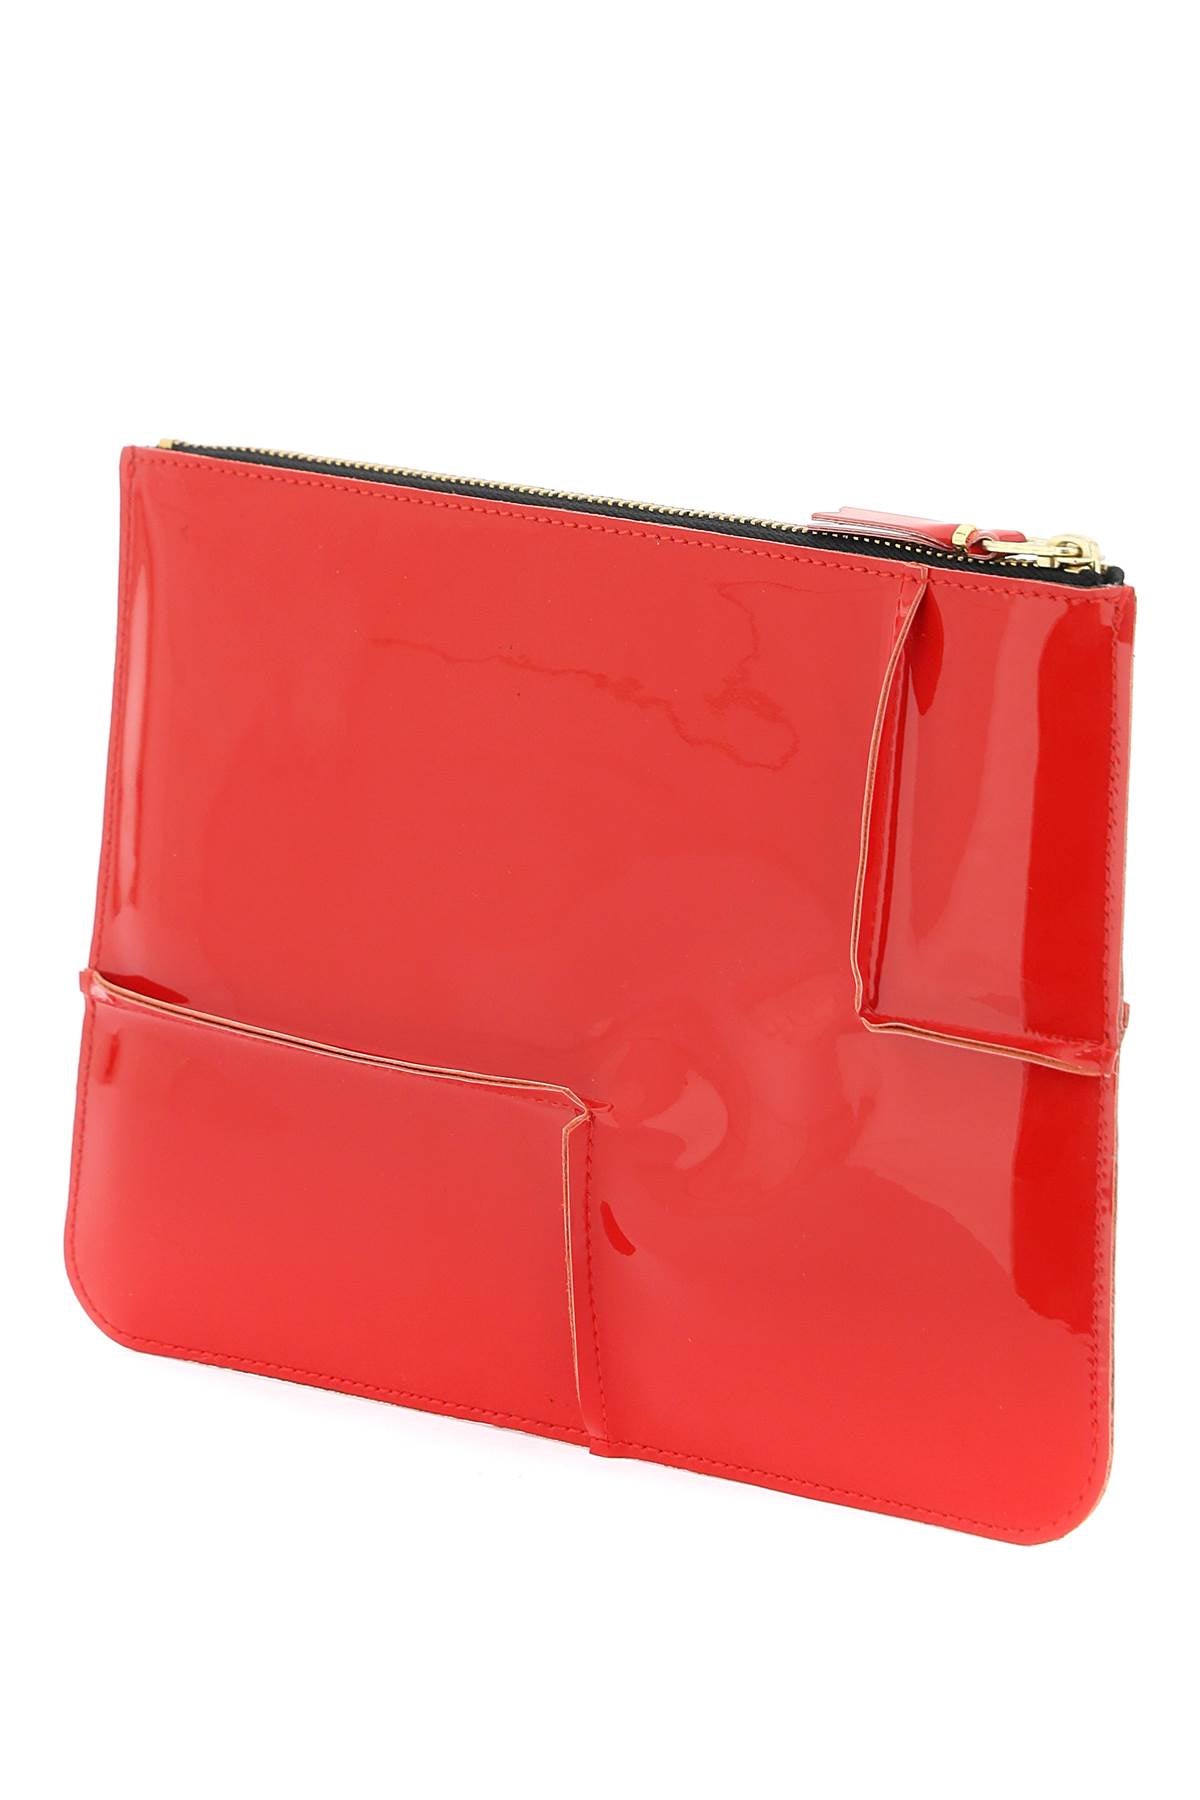 Comme des garcons wallet glossy patent leather-1